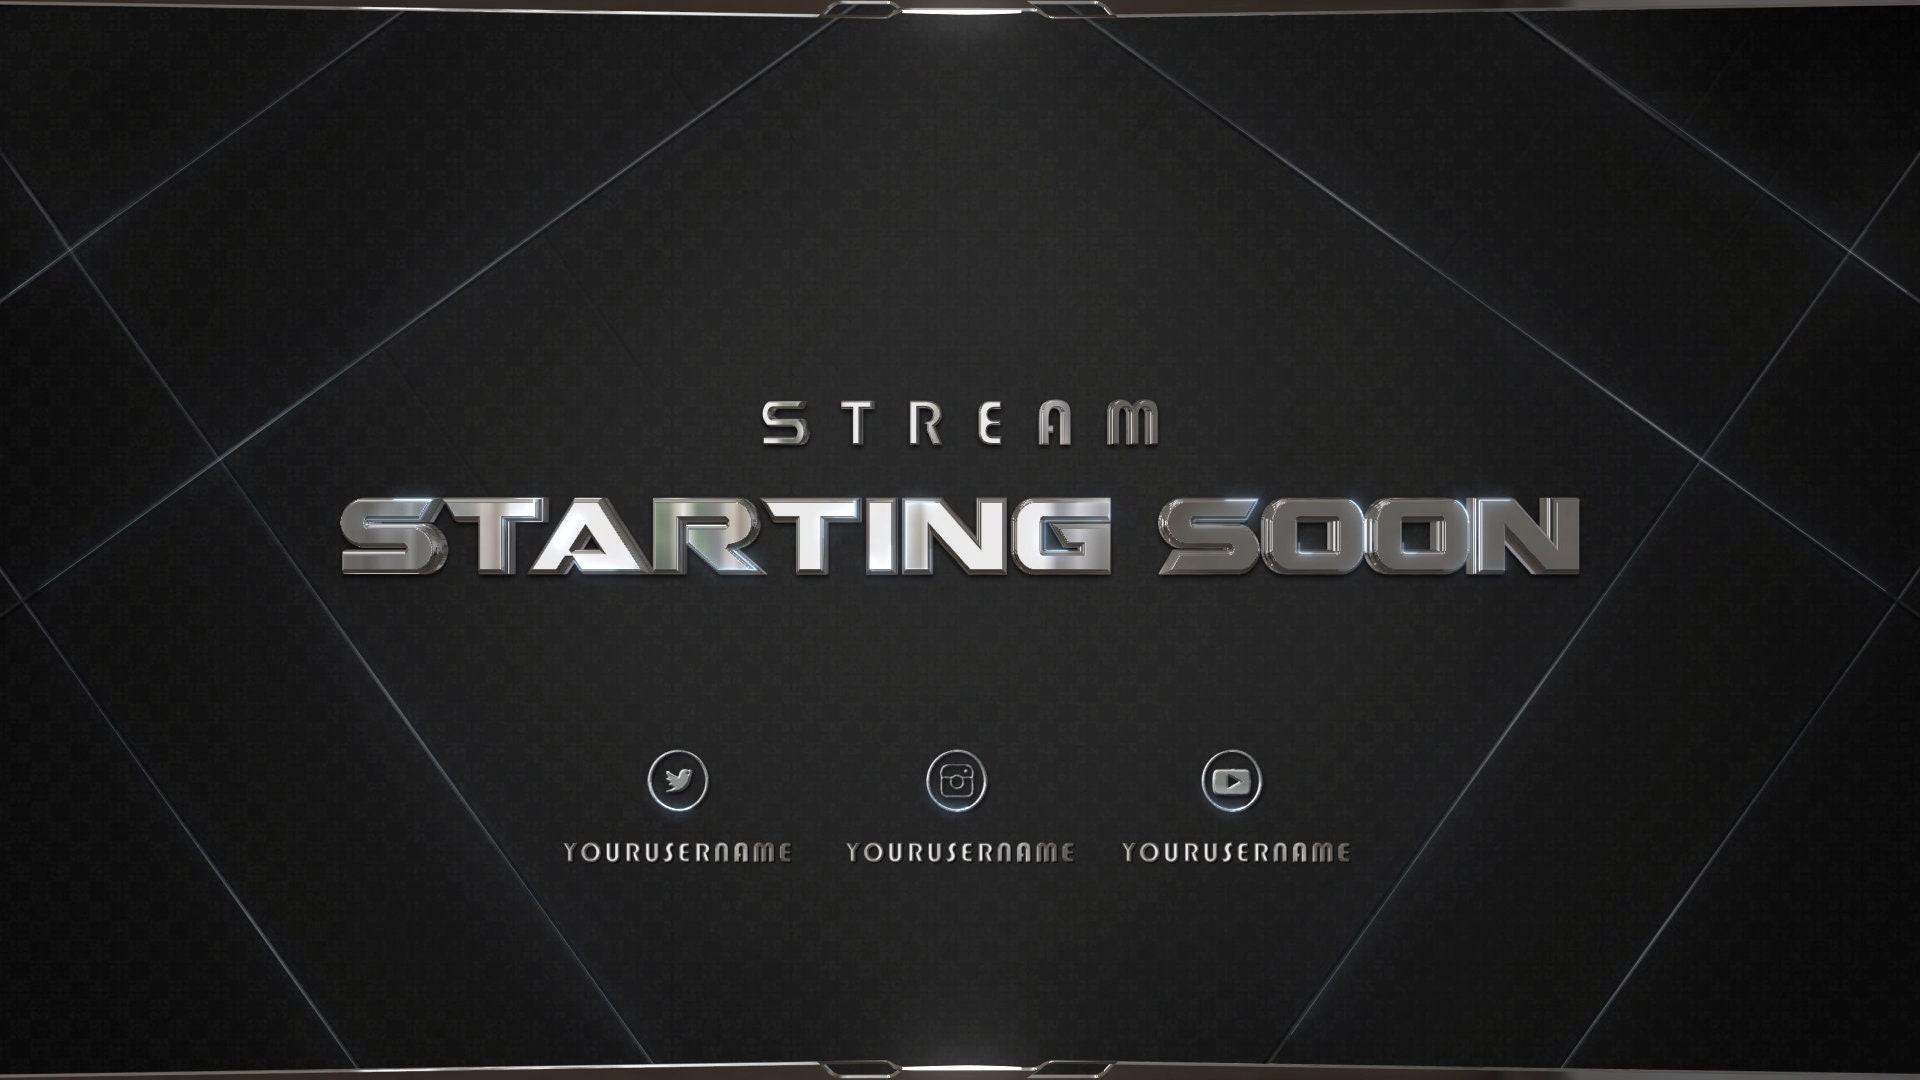 Full Clean Animated Twitch Stream Screens Banner Pack Lase - Etsy